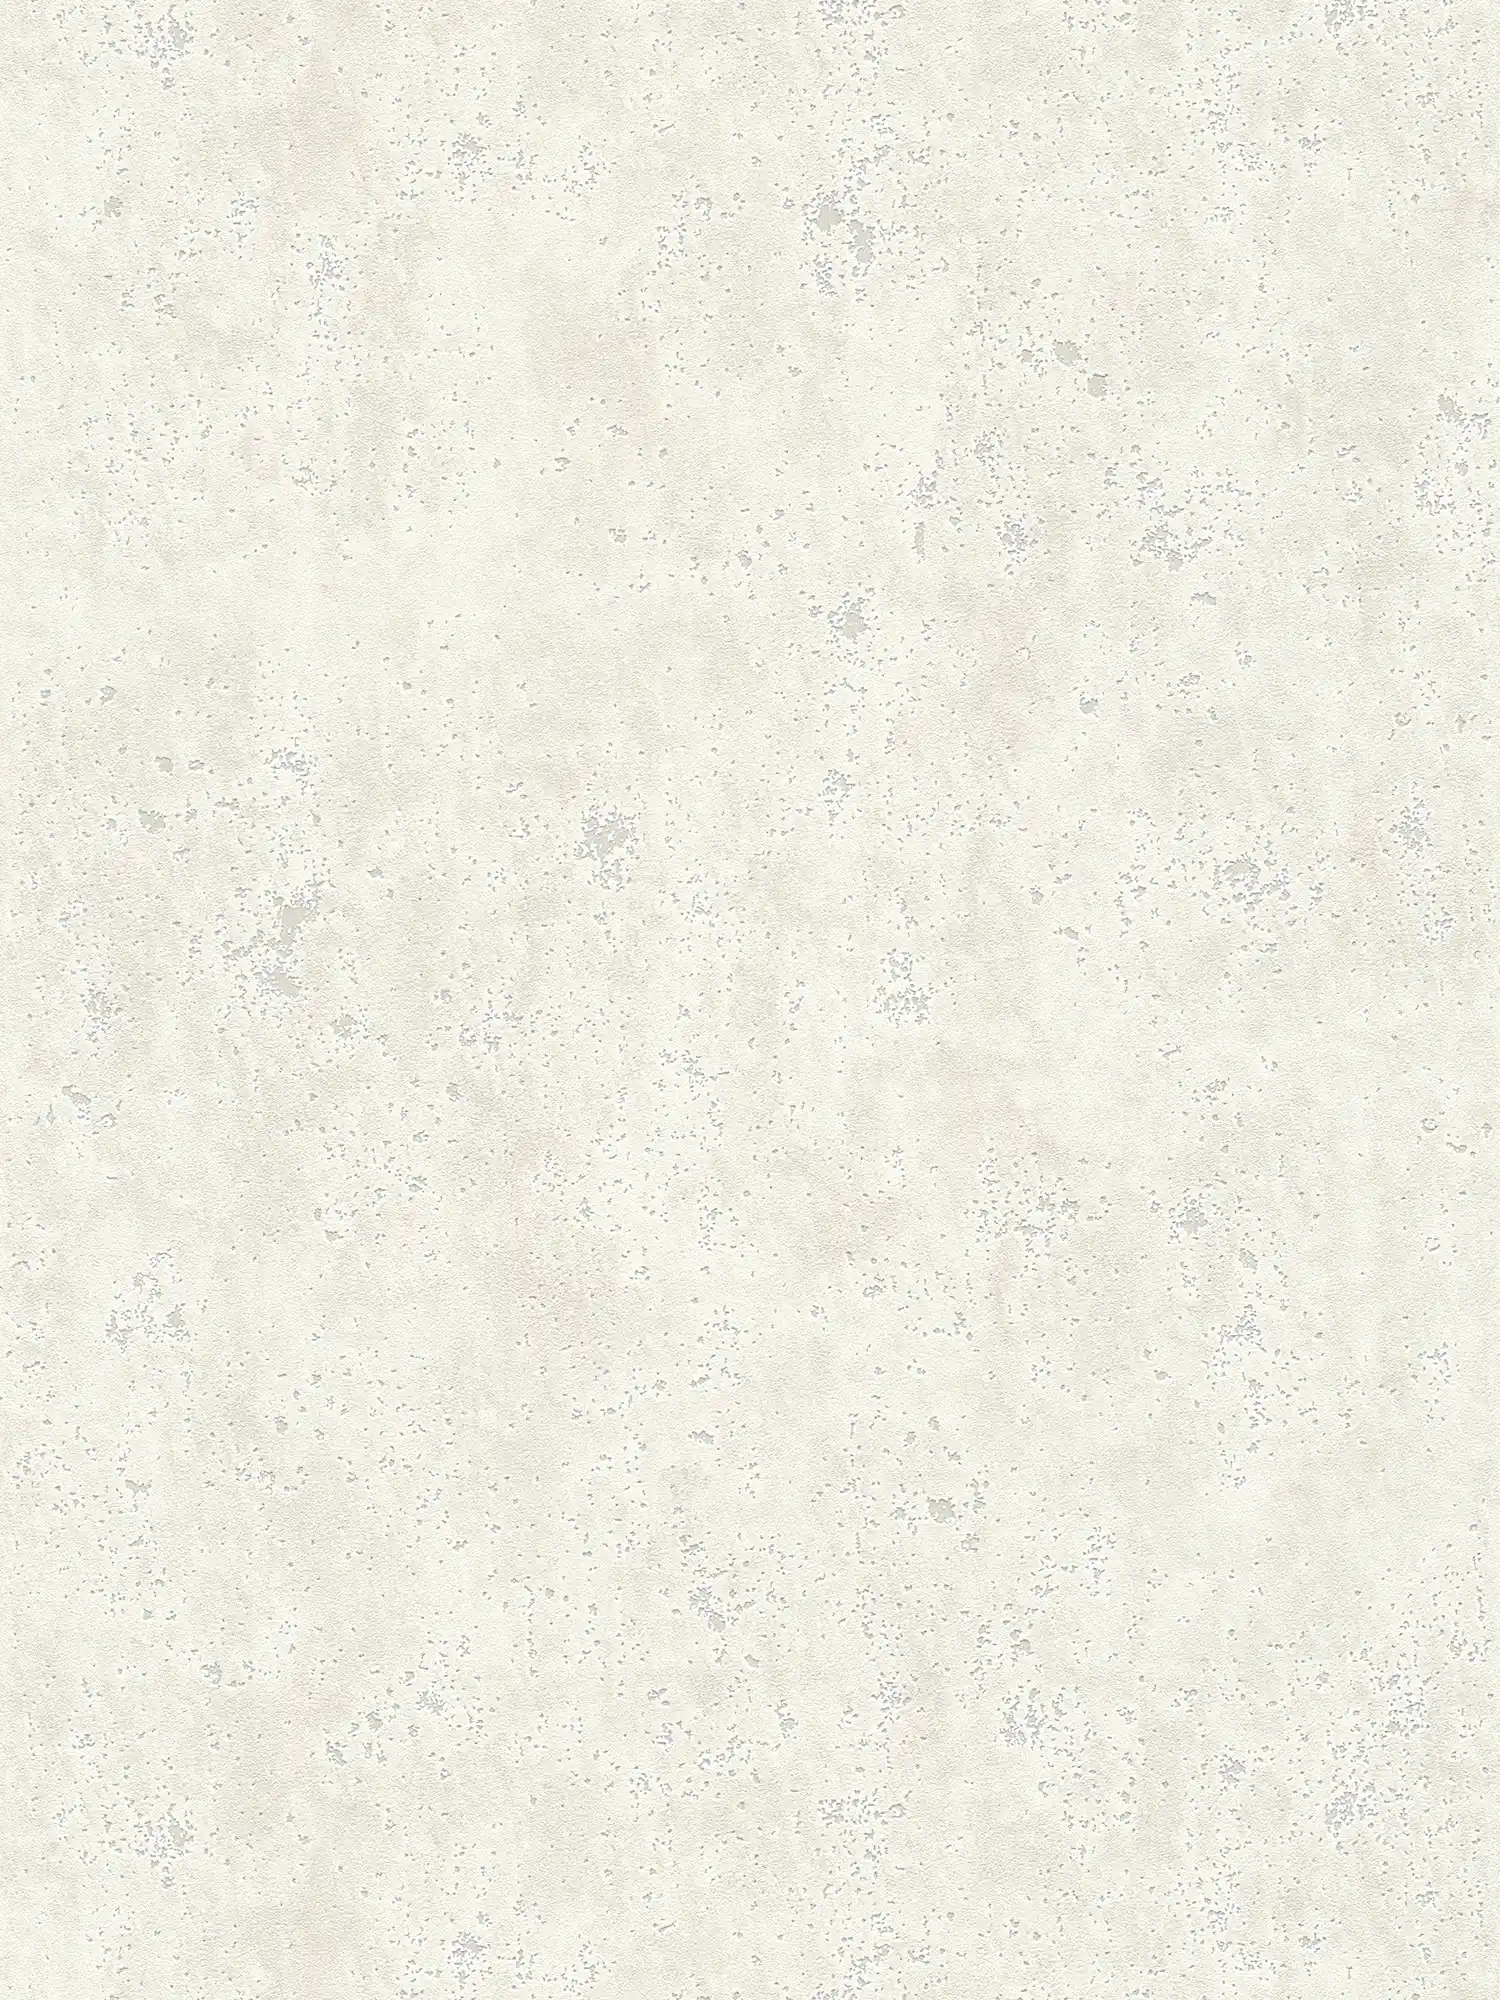 Wallpaper with plaster look & surface texture - cream
